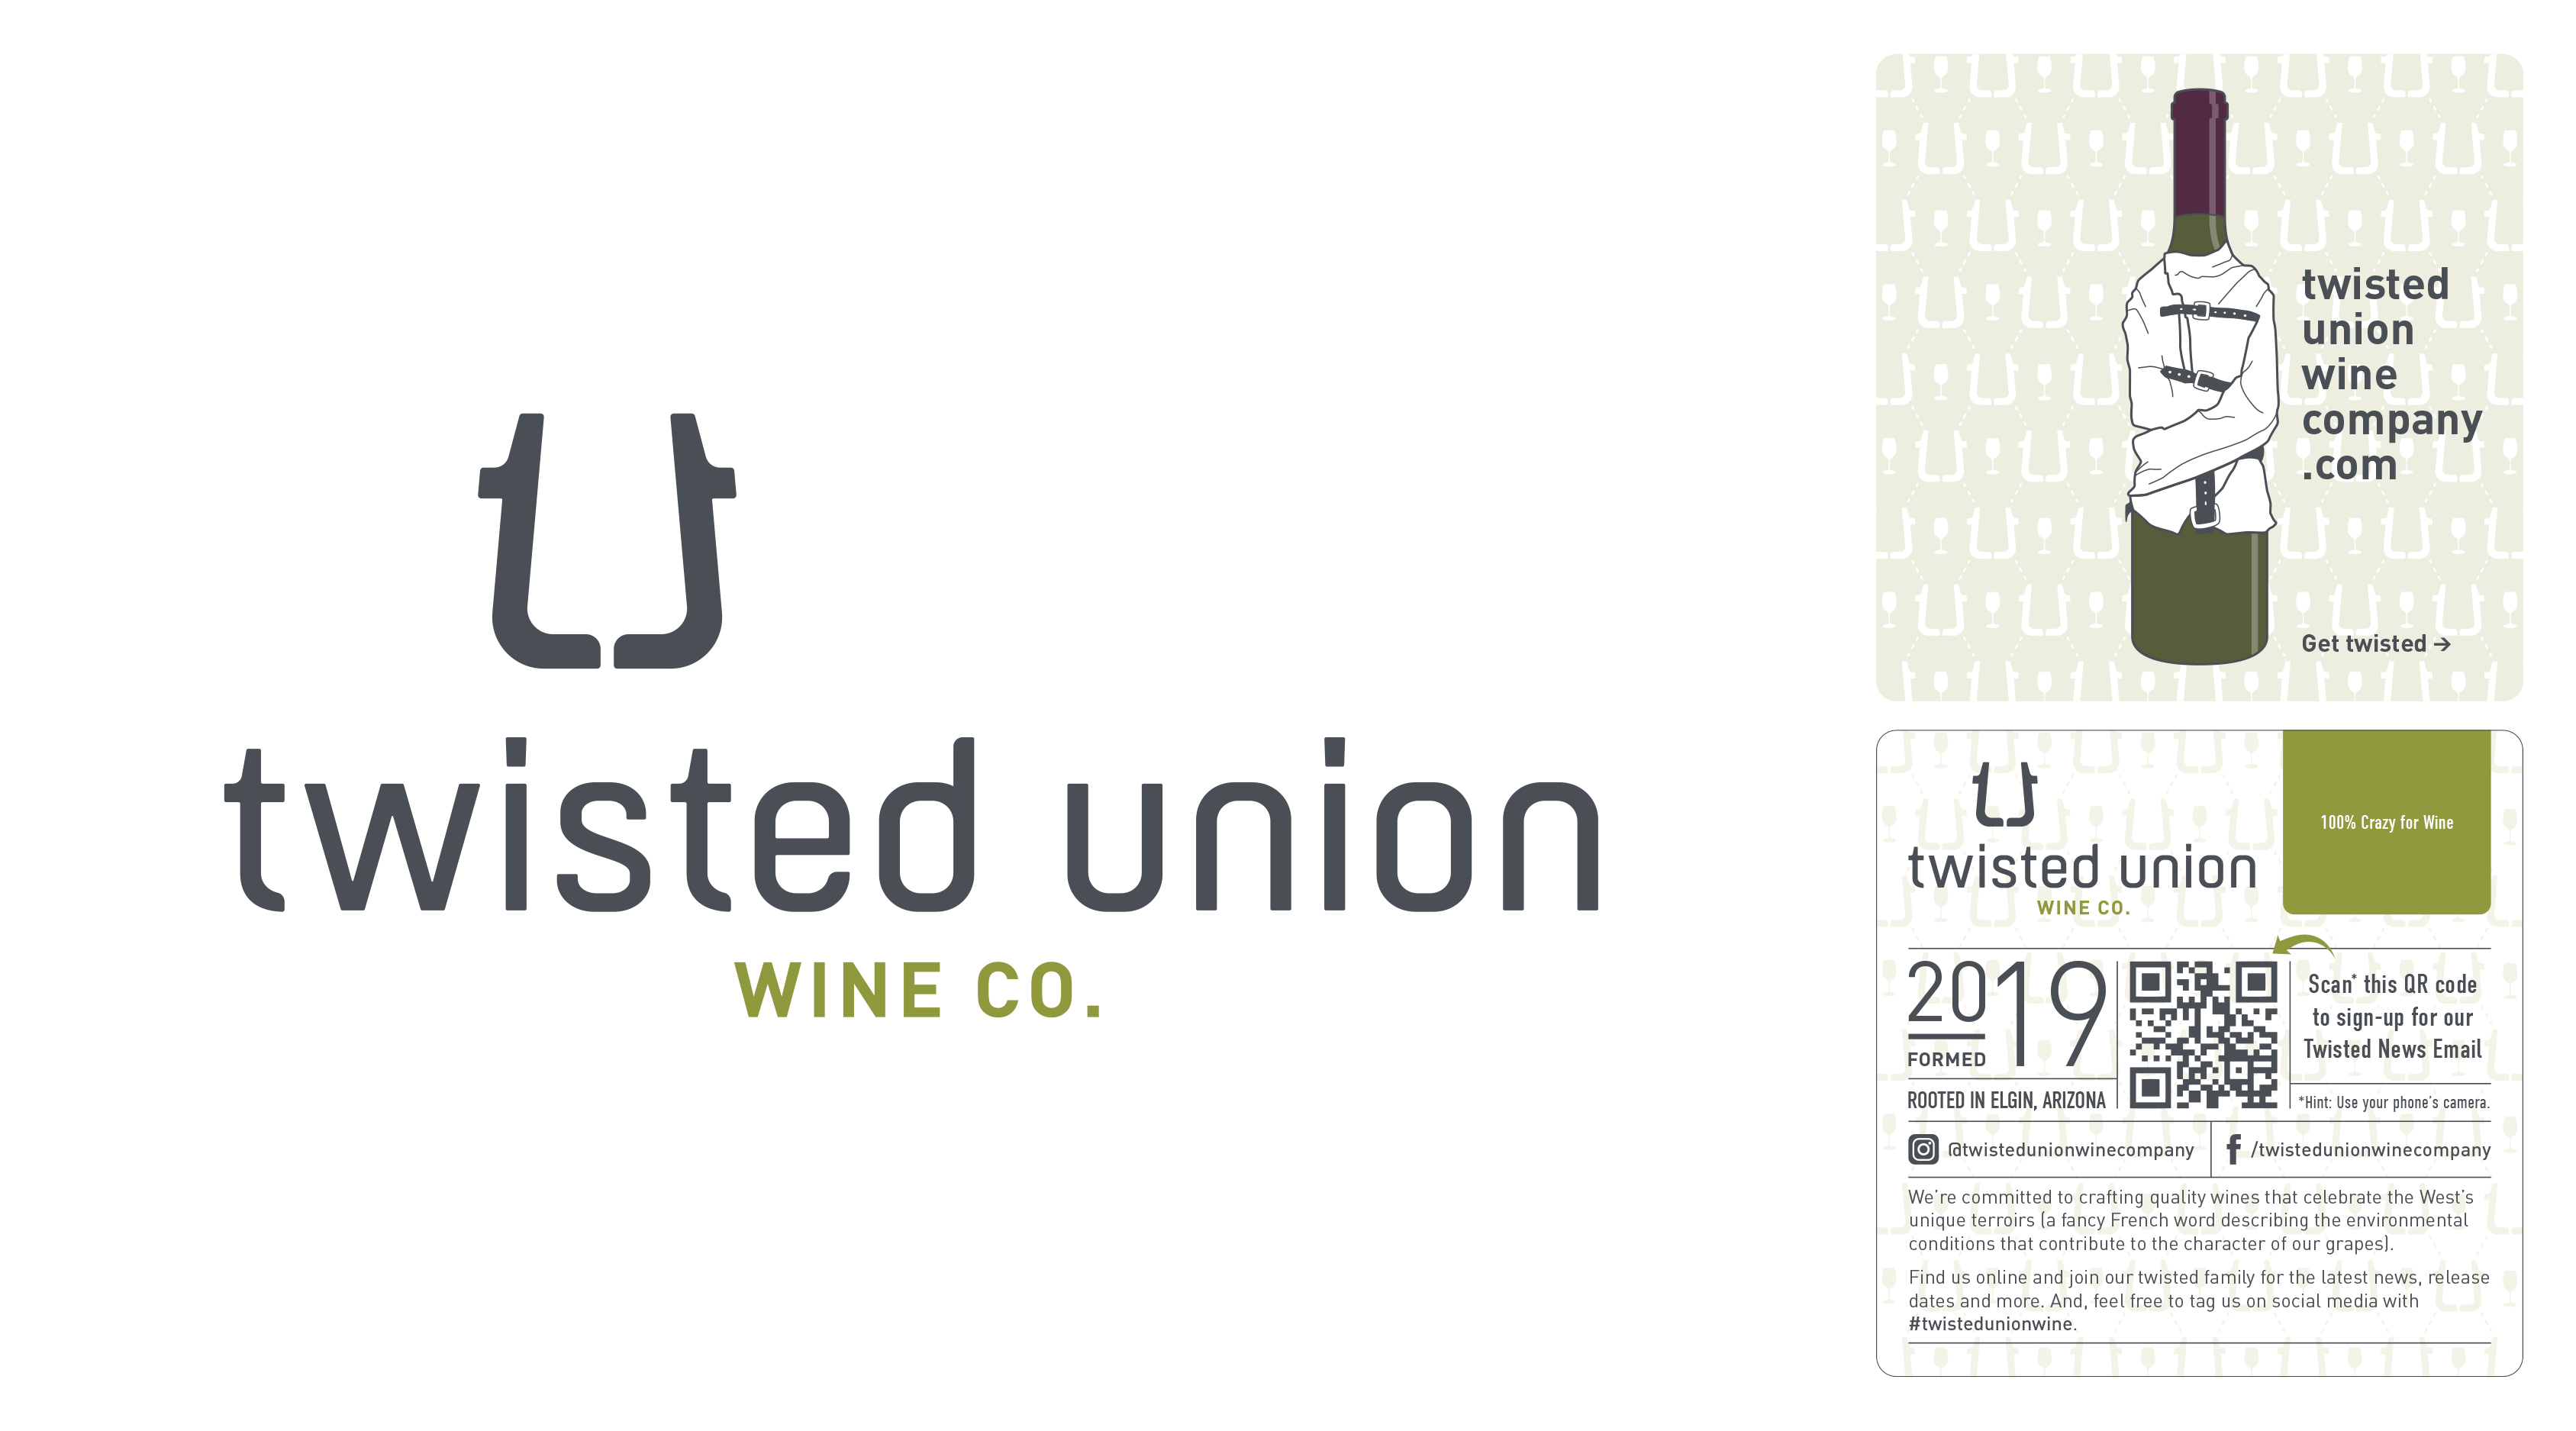 featured image:Twisted Union Wine Co. Brand